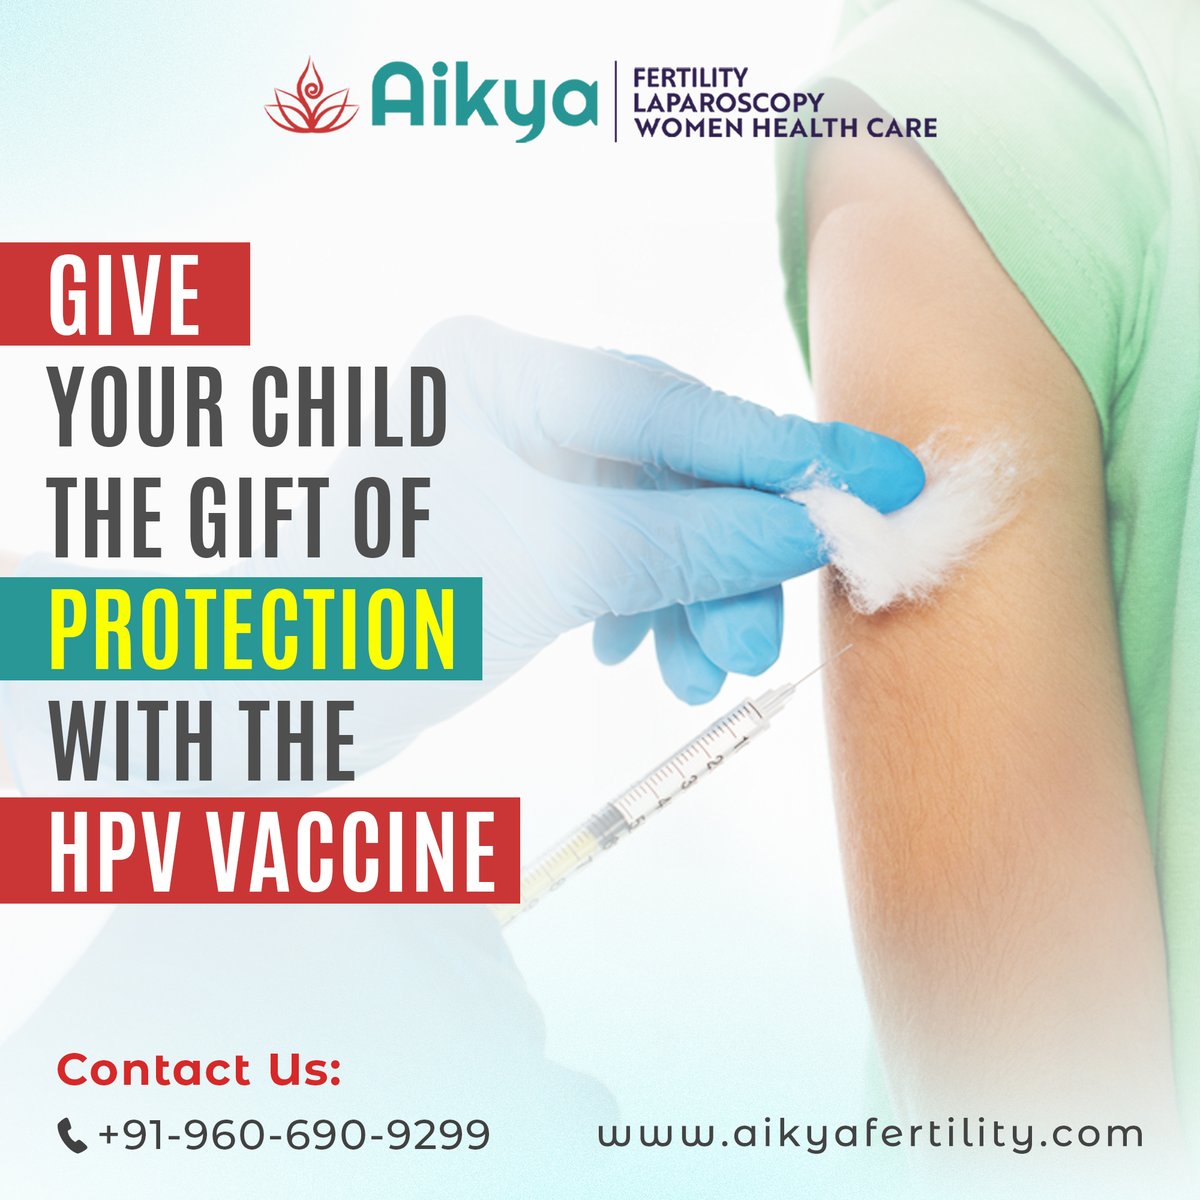 '𝐇𝐏𝐕 𝐯𝐚𝐜𝐜𝐢𝐧𝐞' The protection from the HPV virus! The HPV vaccine is a great way to safeguard your child from a virus that can cause a myriad of health issues later in life. 

📞 9606909299 or 9606919299
🌐 aikyafertility.com

#success #parentingwin #HPVprevention